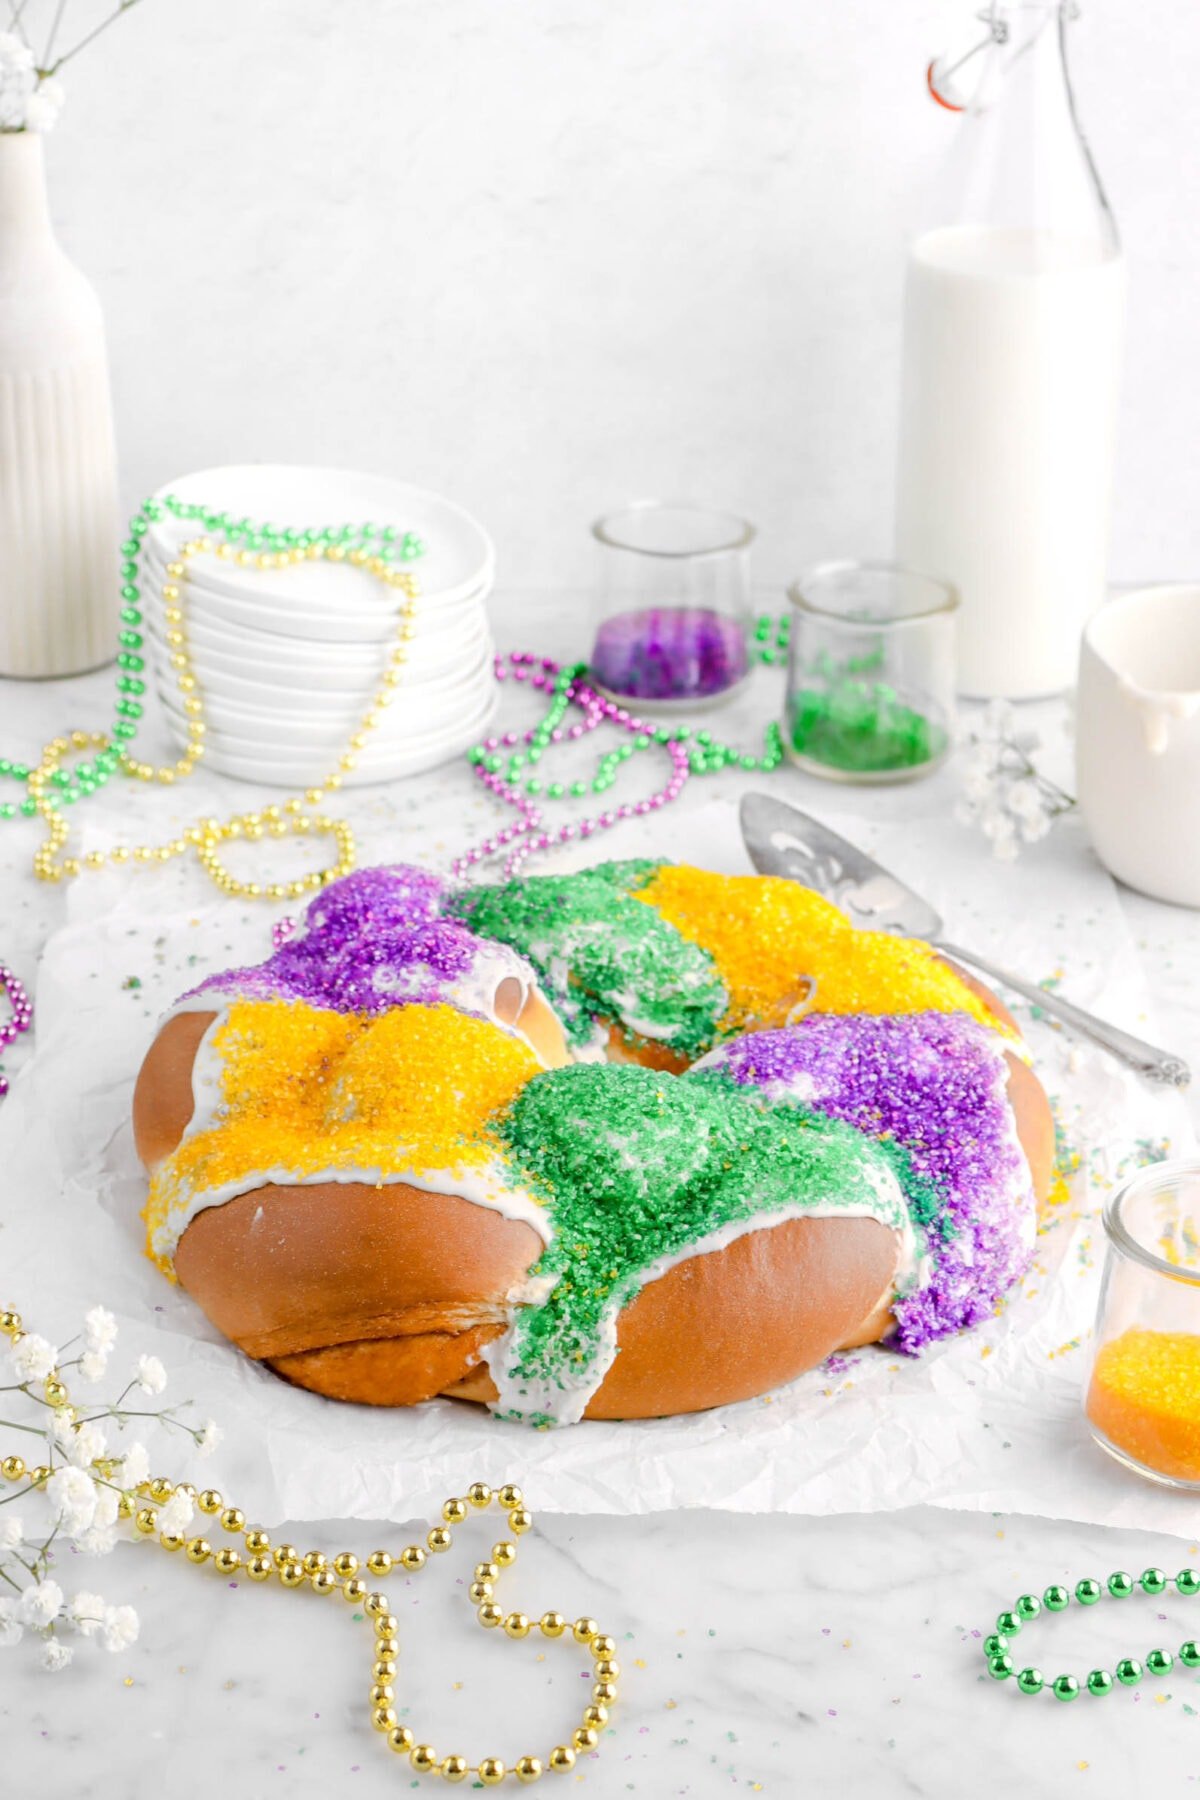 king cake on parchment paper with mardi gras beads around